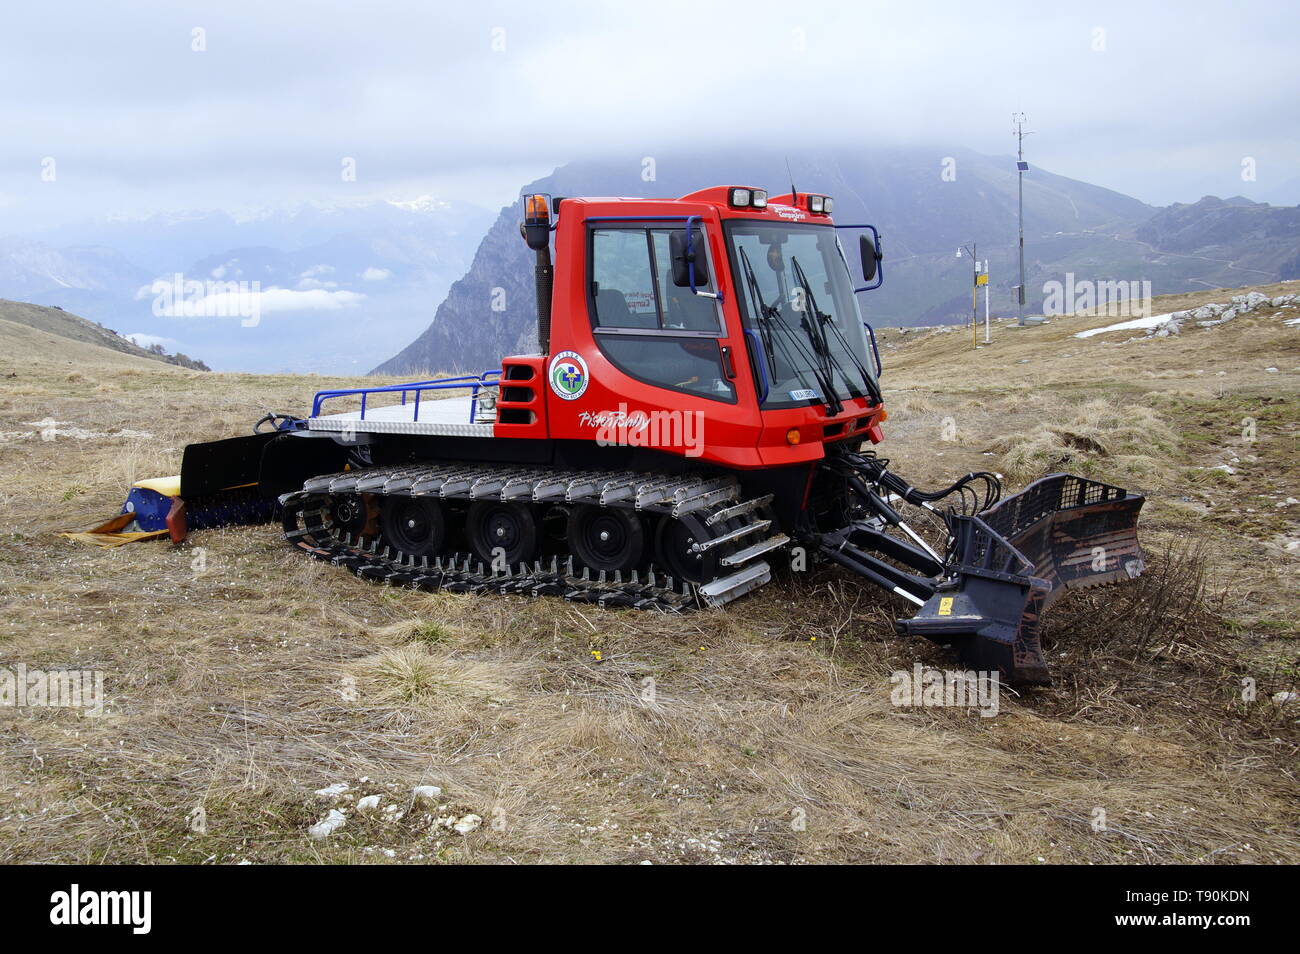 Malcesine, Verona, Italy - April 25, 2019: Red PistenBully on the top of a mountain. PistenBully is a multi purpose all terrain caterpillar. Stock Photo